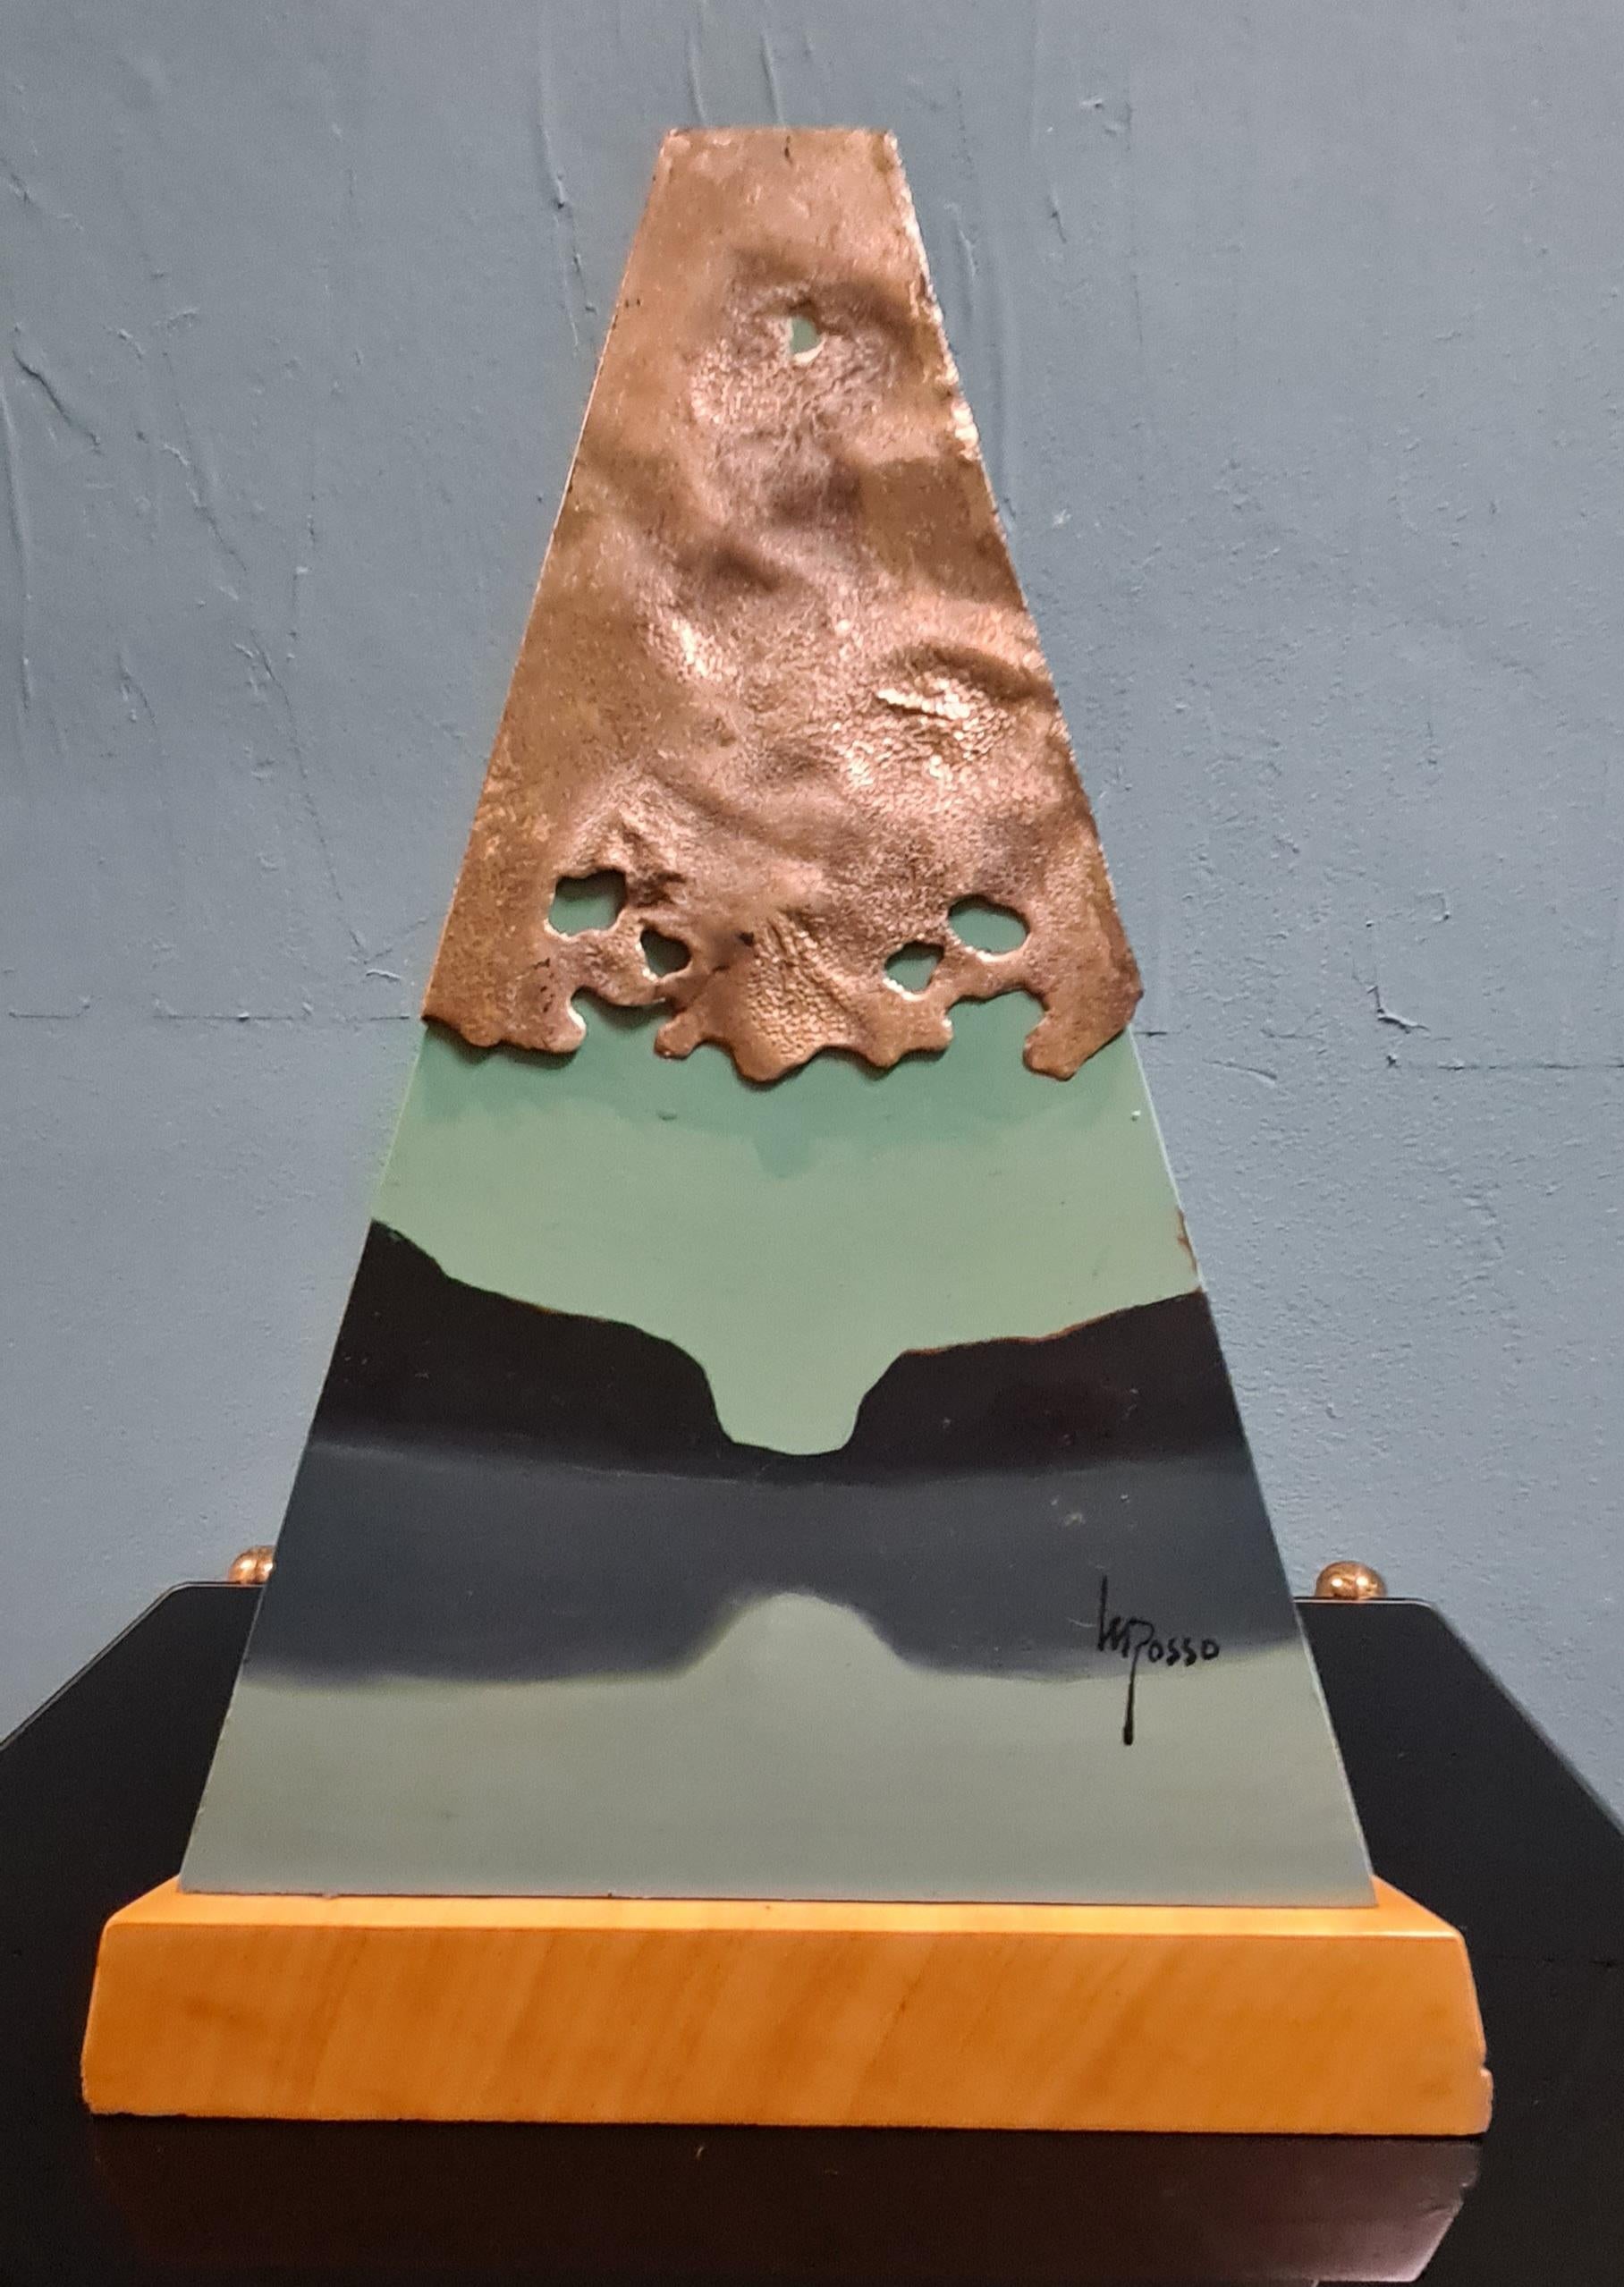 Metaphysical style sculpture signed by artist Mario Rosso.

The sculpture features a triangular wooden base on which towers a painted metal pyramid decorated with silver and a large quartz crystal.

The metaphysical-style painting on the sculpture,